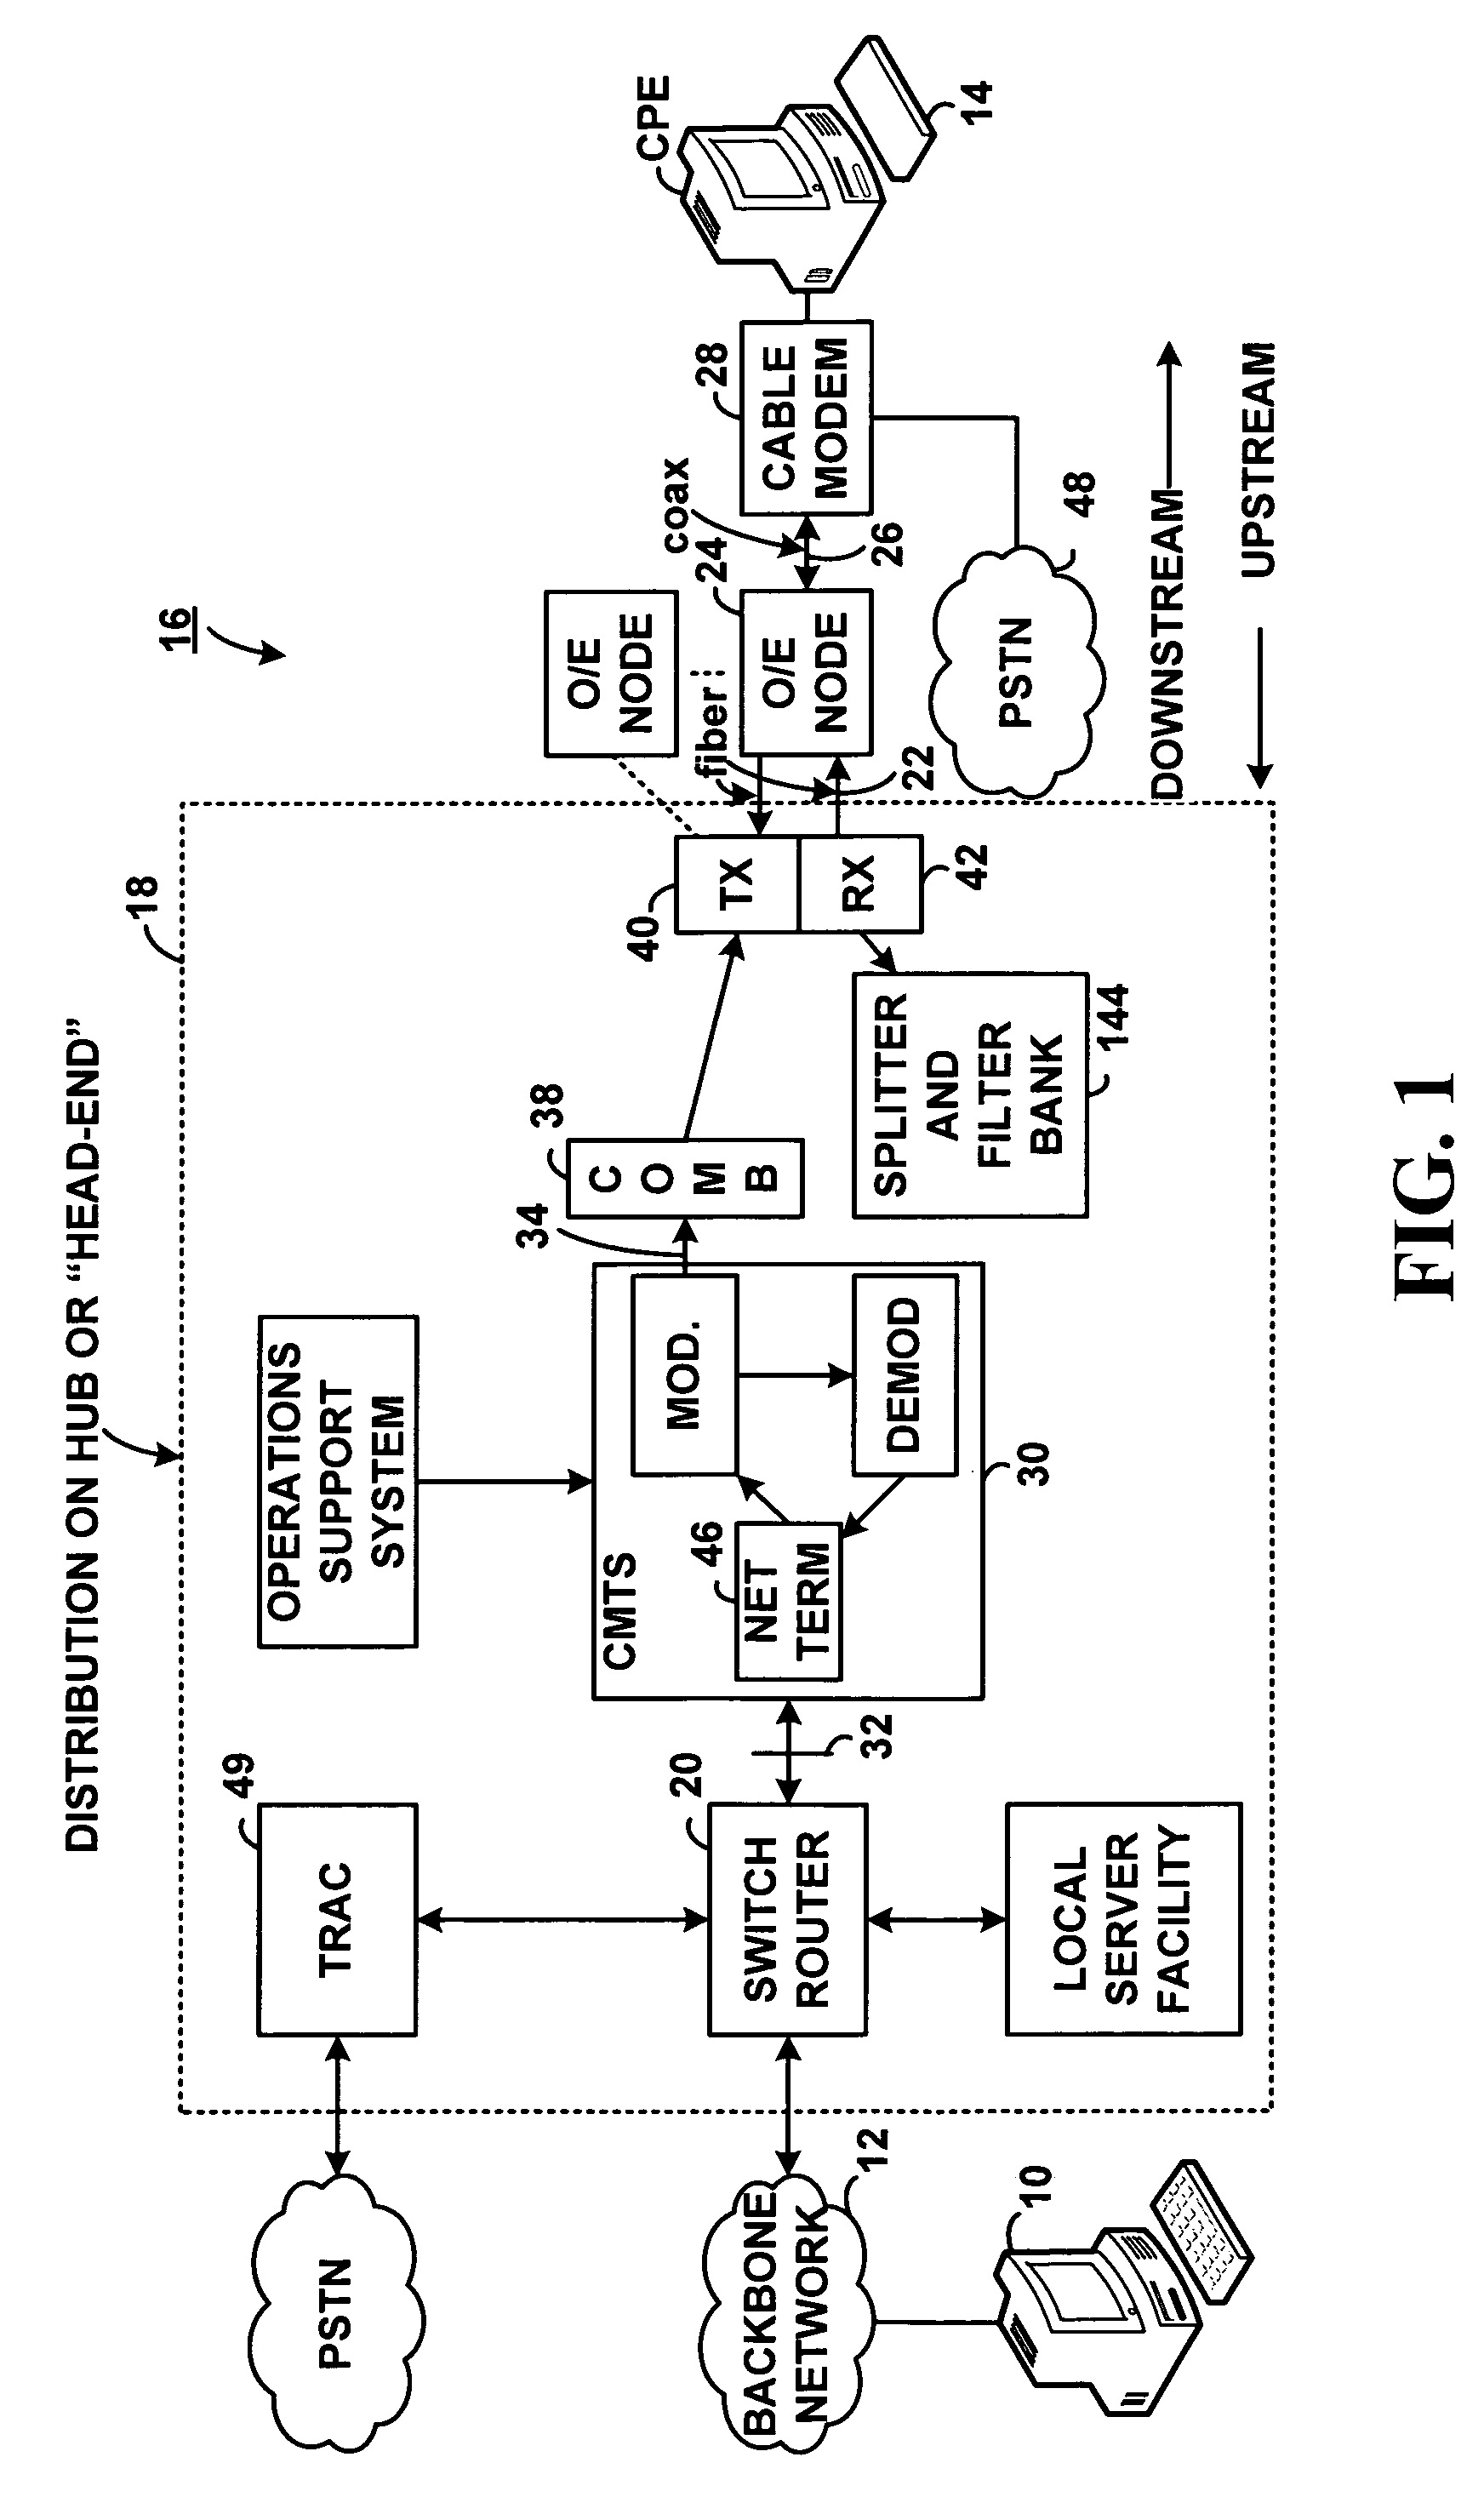 Method for dynamic performance optimization in a data-over-cable system